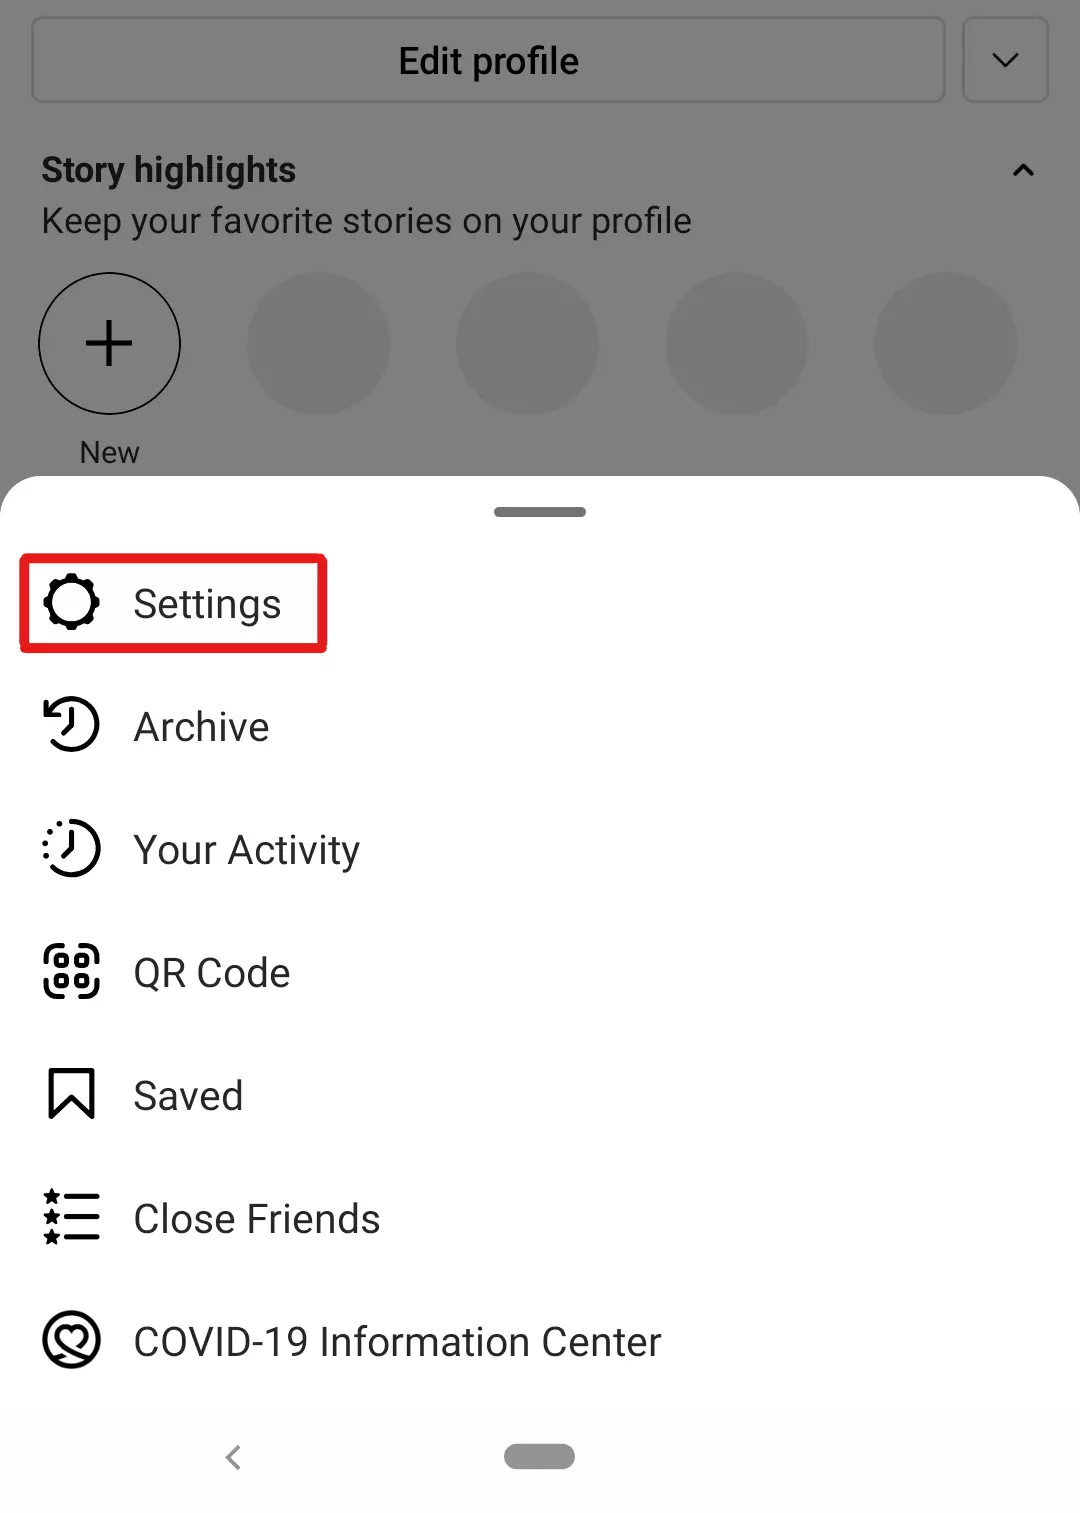 Tap on Settings from Profile Settings